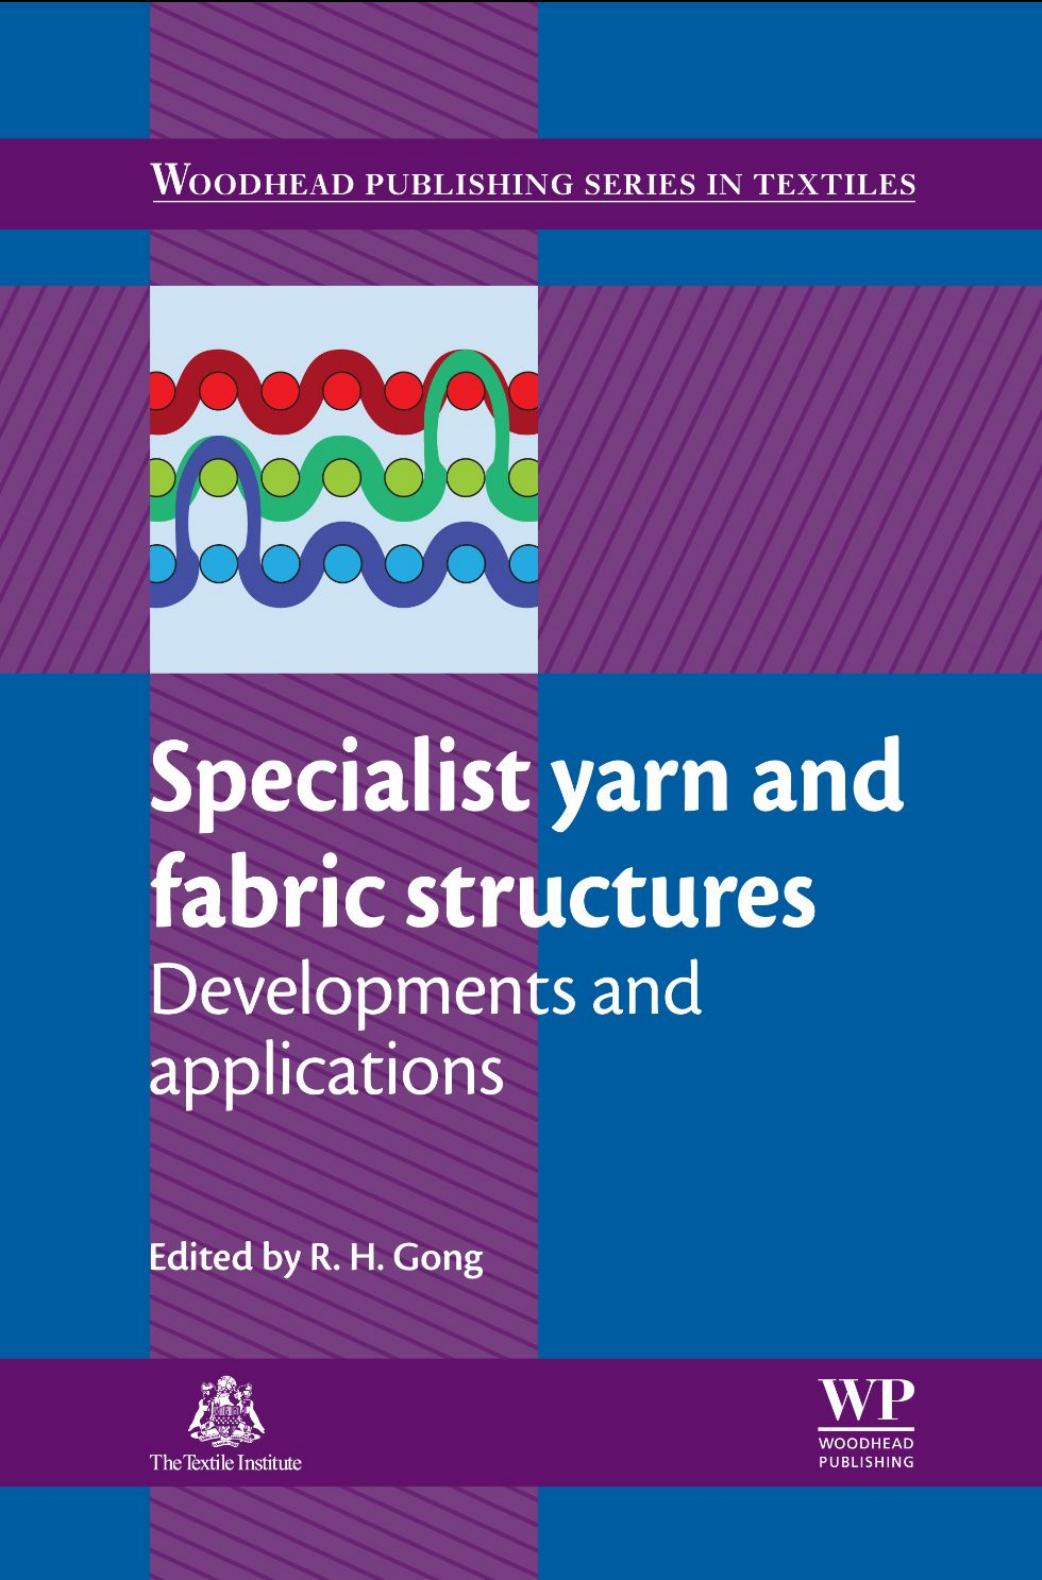 Specialist Yarn and Fabric Structures Developments and Applications (Woodhead Publishing Series in Textiles) 2011